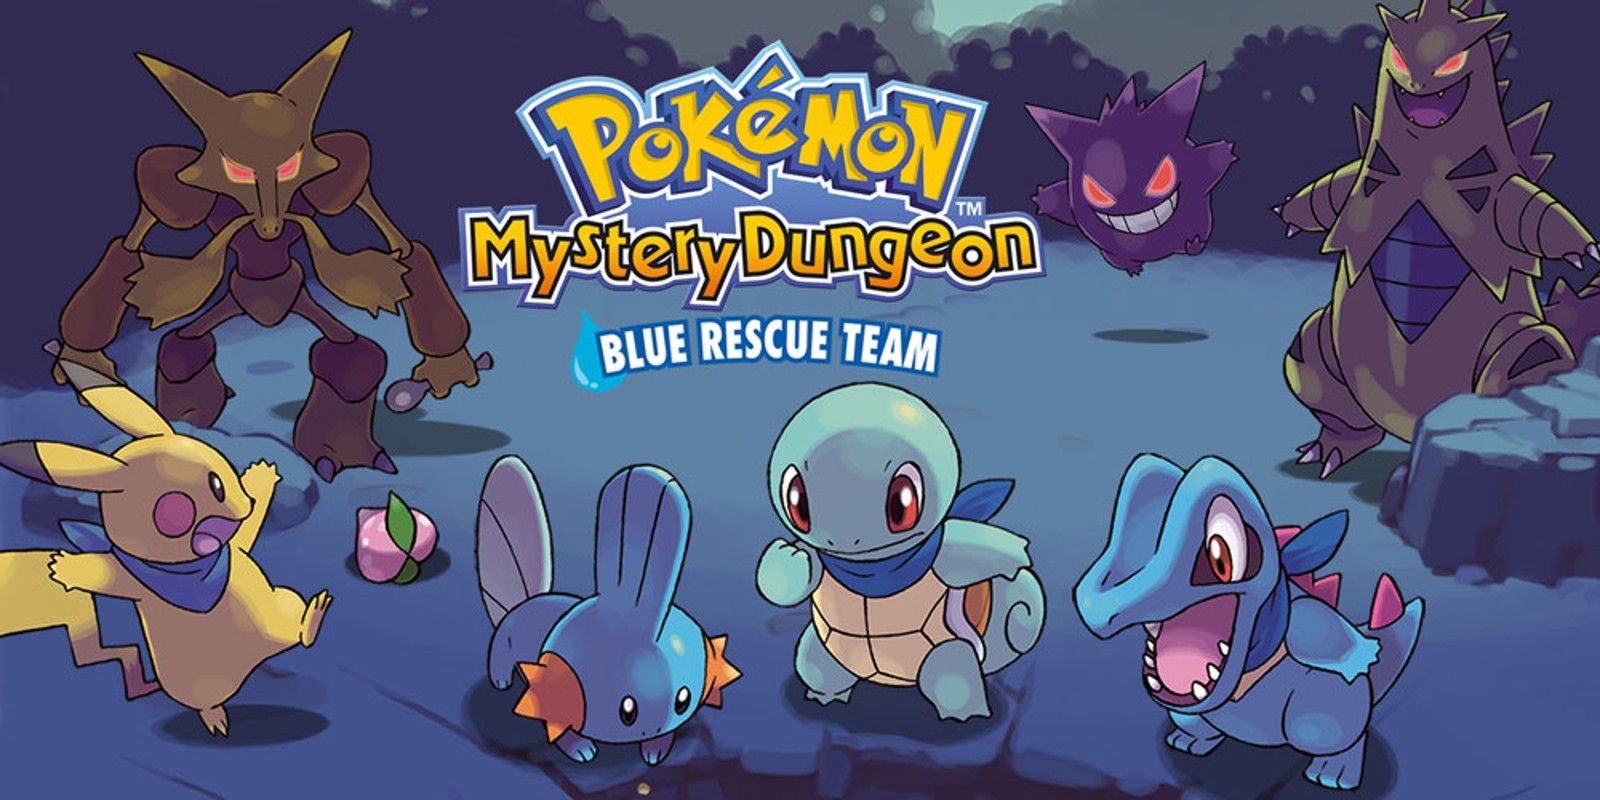 pokemon mystery dungeon blue rescue team logo and artwork